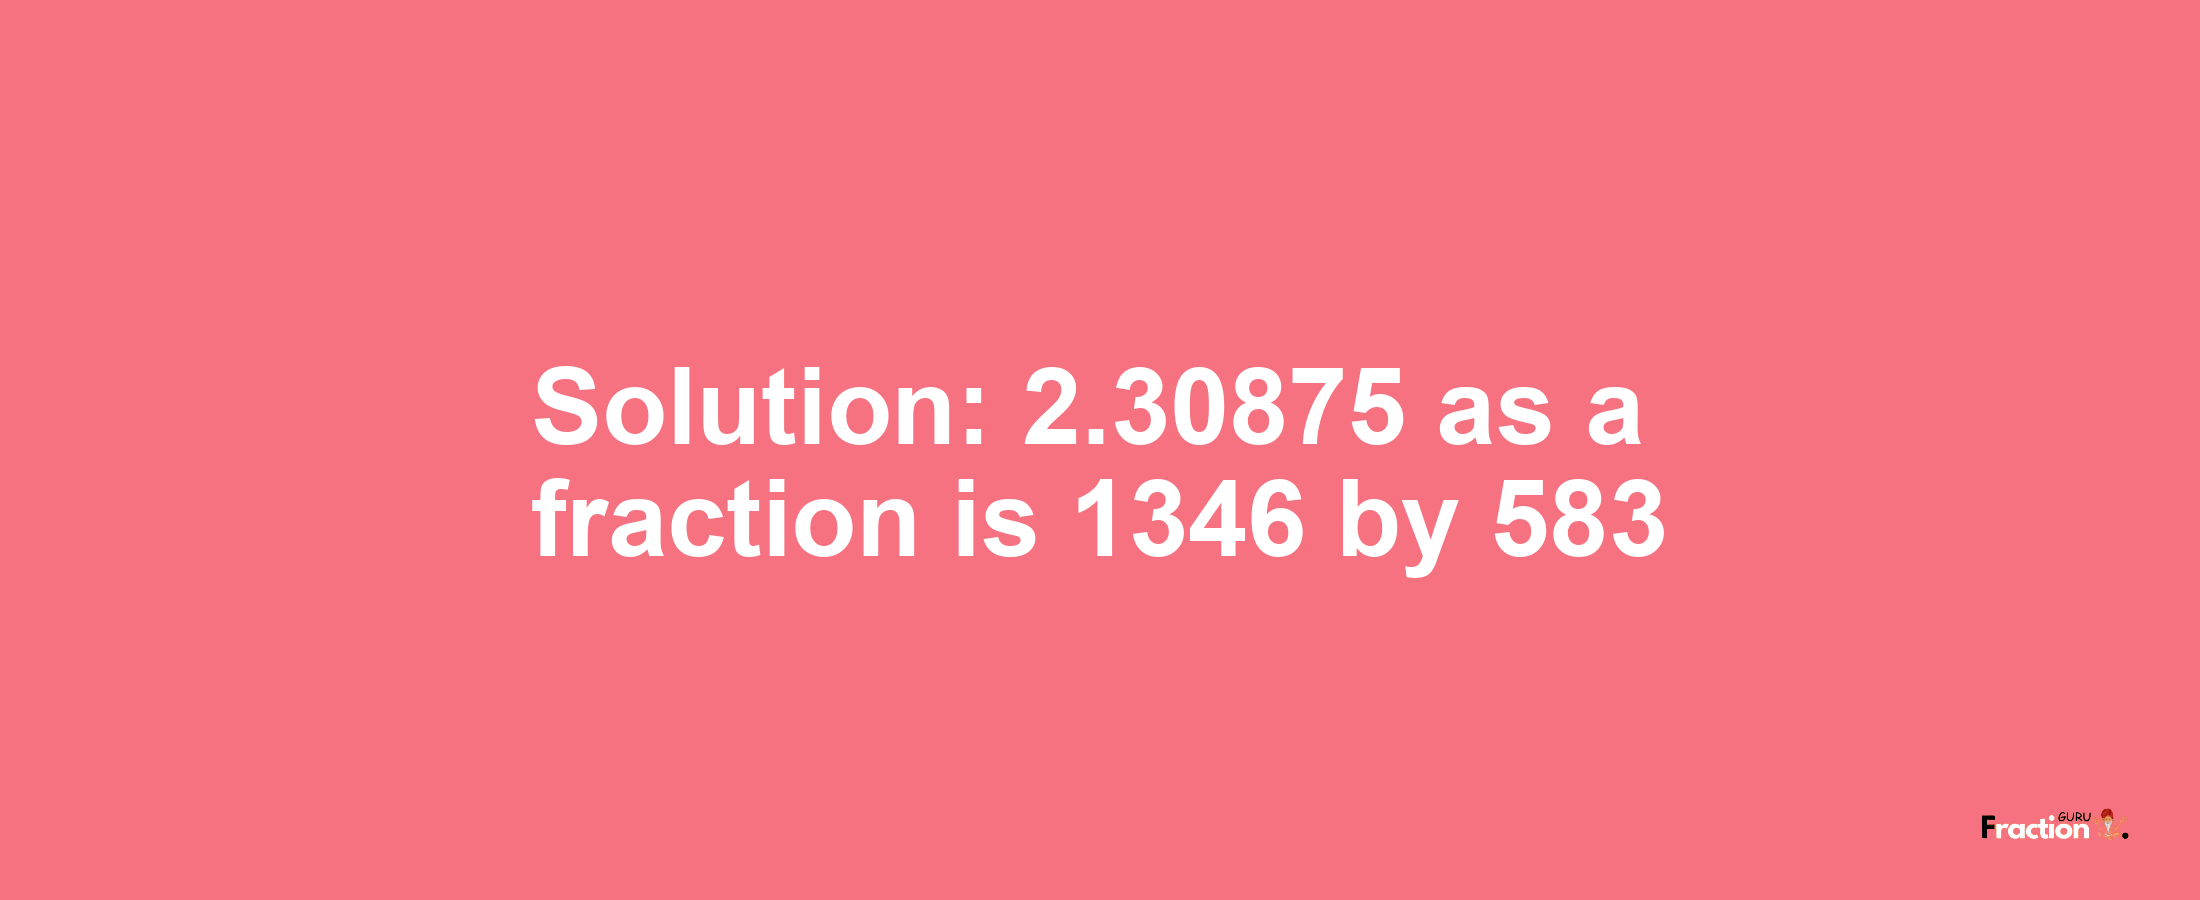 Solution:2.30875 as a fraction is 1346/583